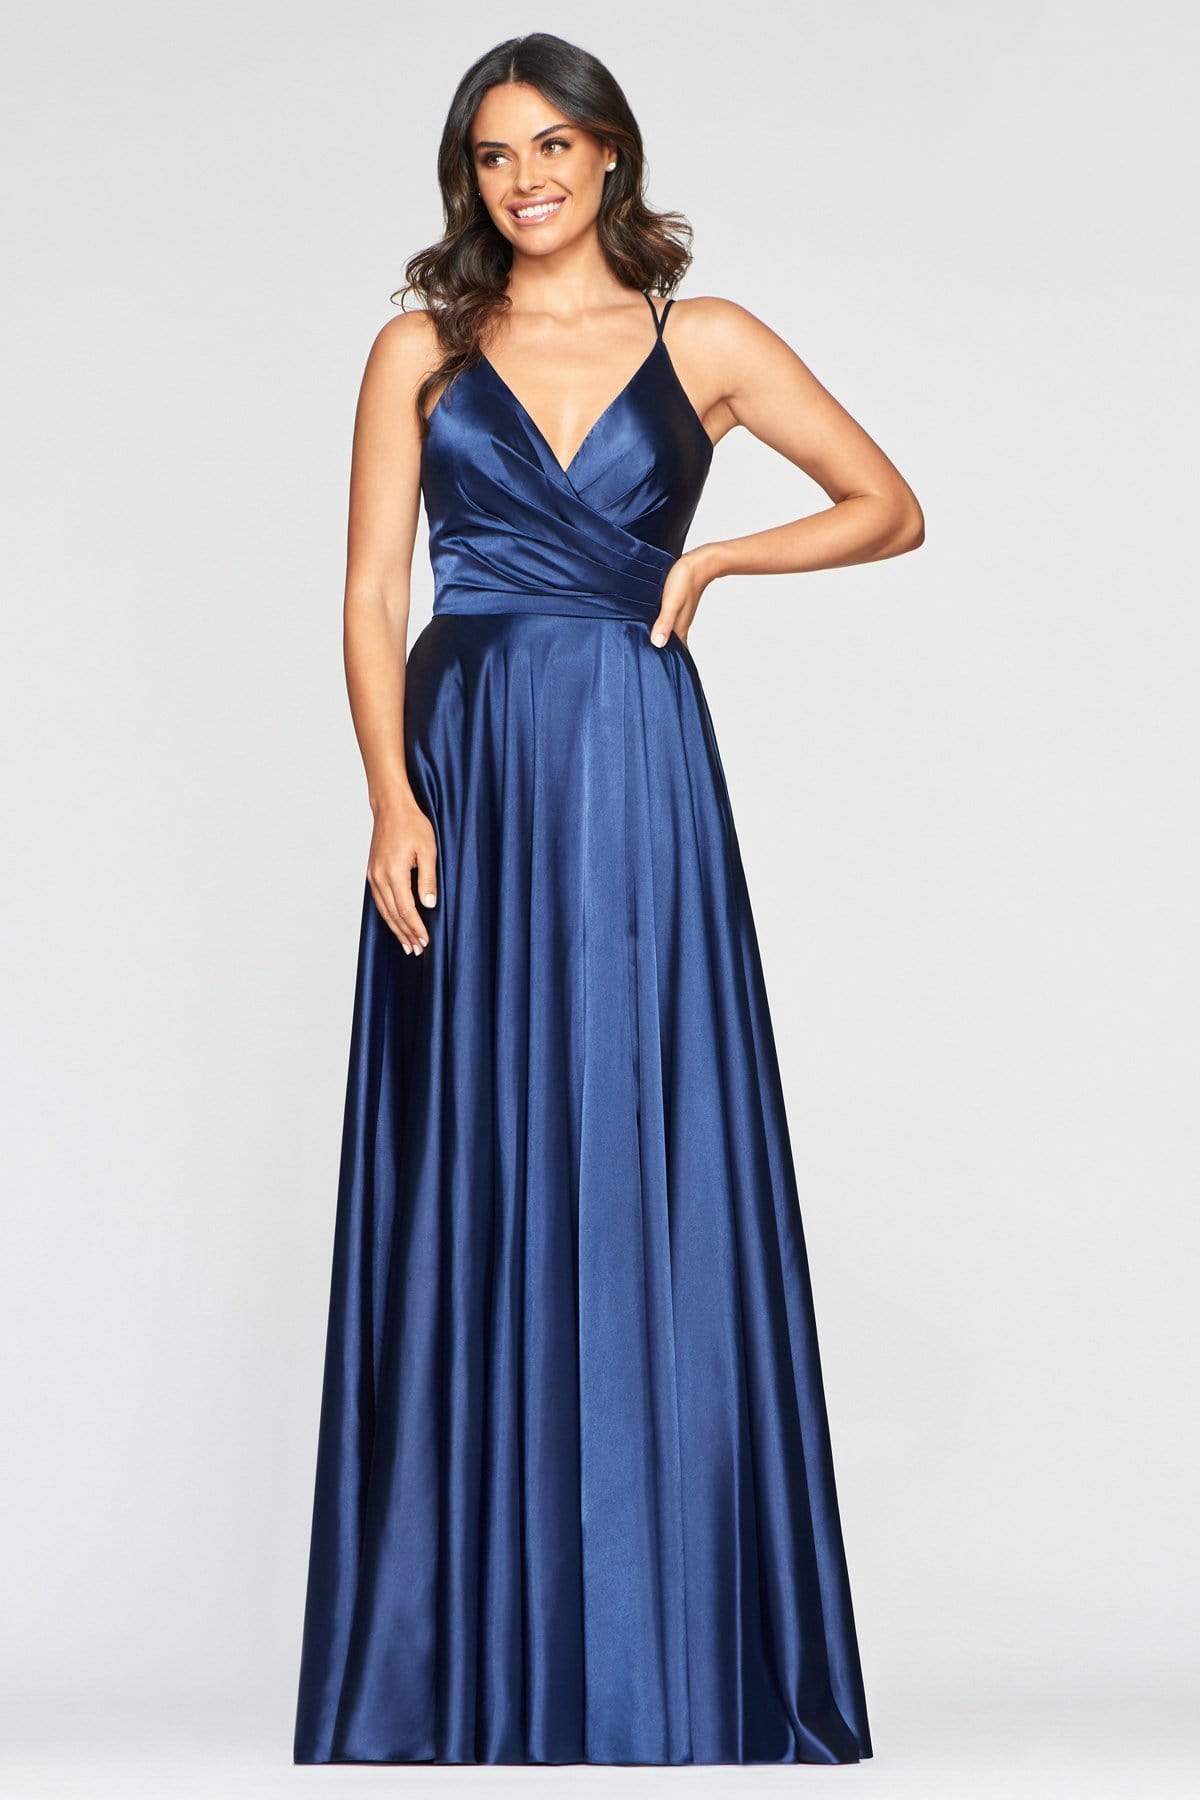 Faviana - S10429 V Neck Pleated Bodice Lace-Up back Satin Gown
